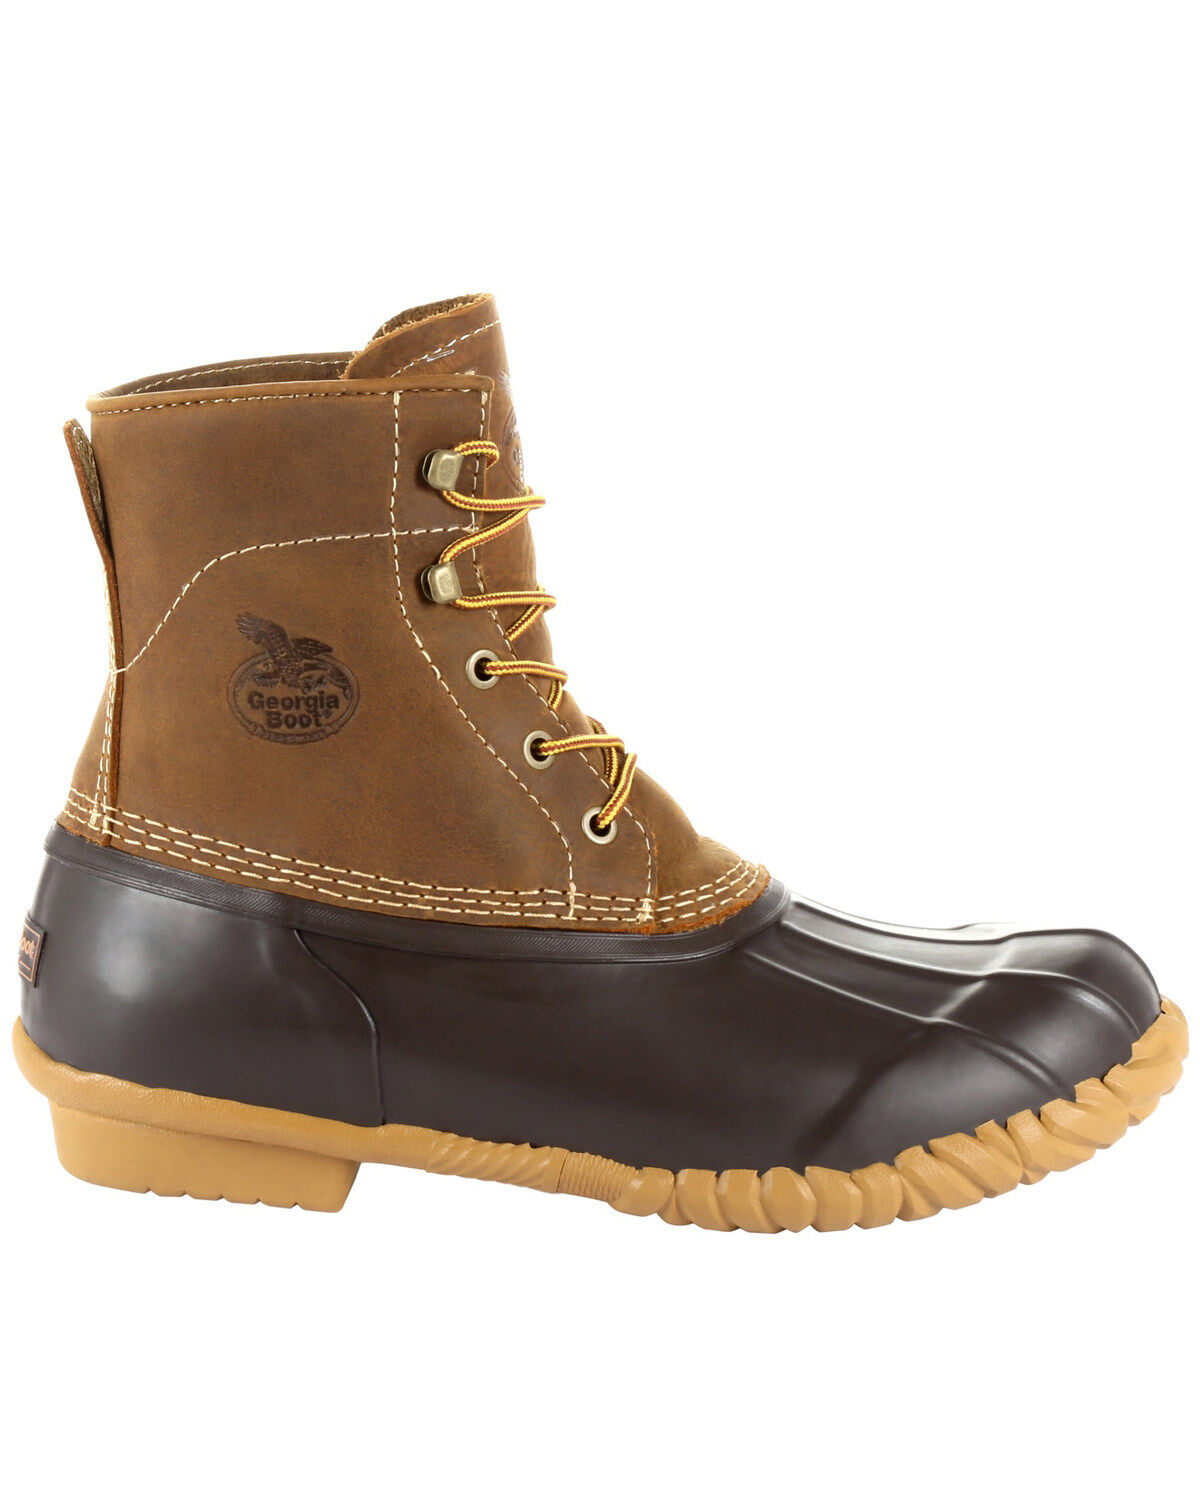 mens lace up duck boots